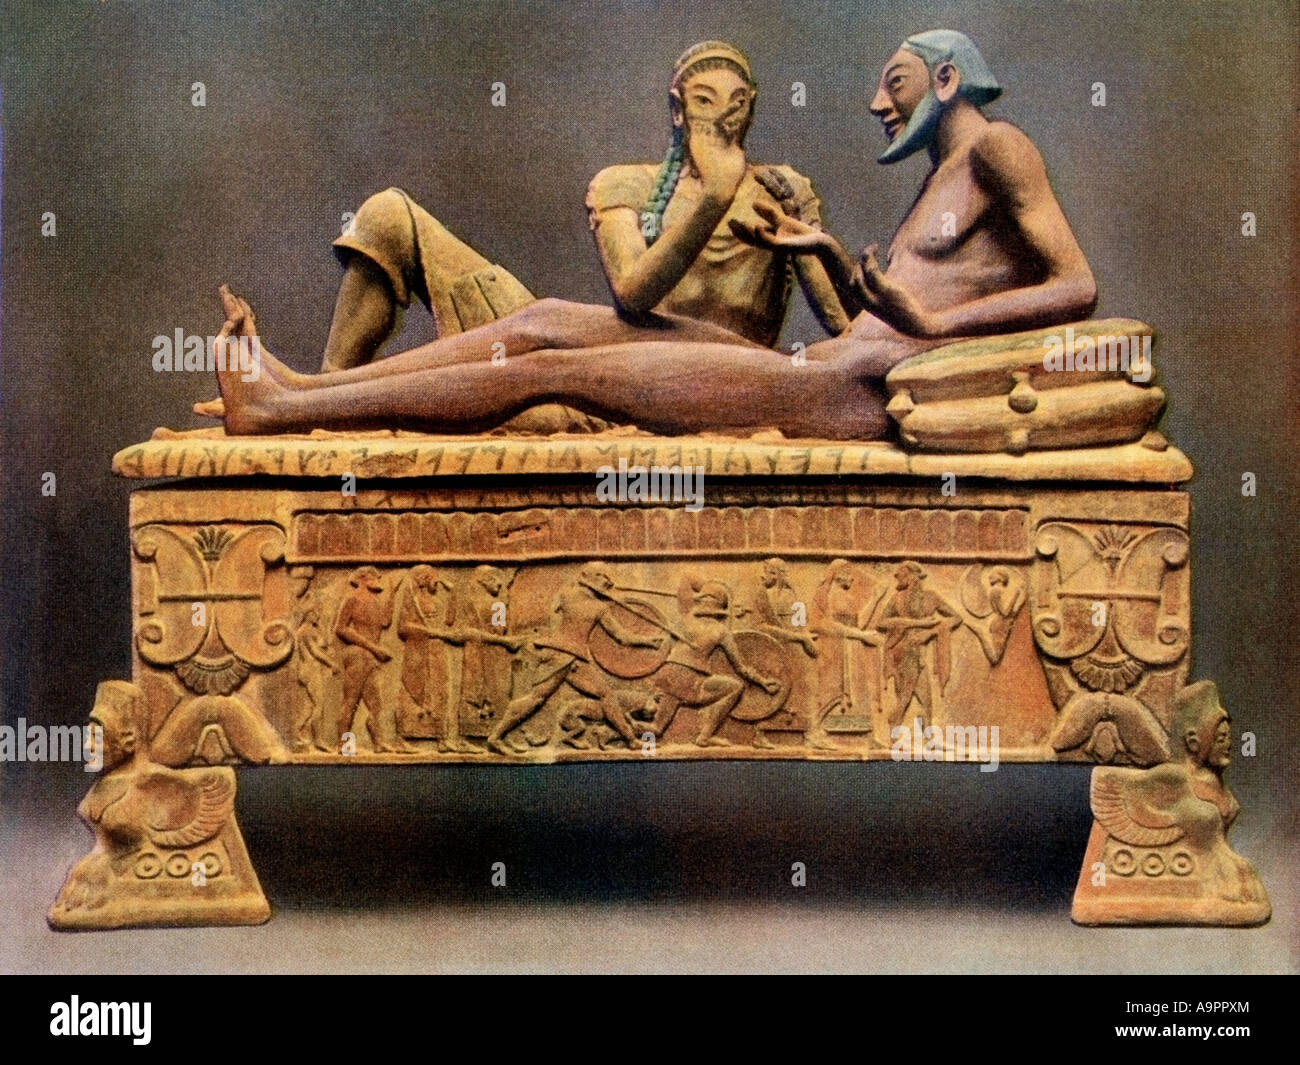 Etruscan sarcophagus with two figures (known forgery). Color halftone of a photograph Stock Photo